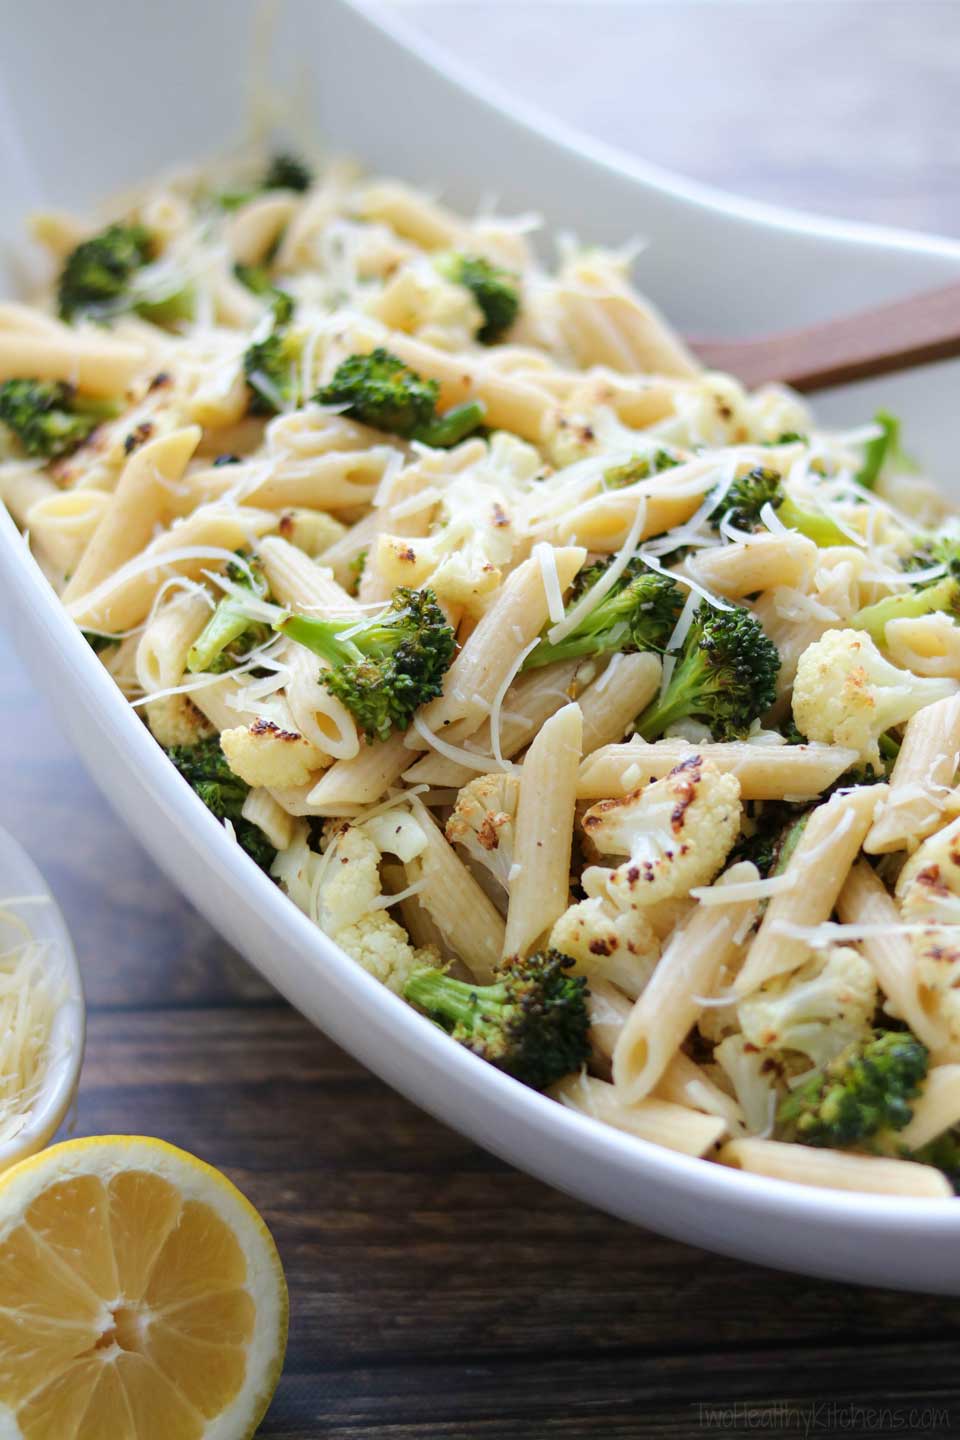 Our #1 most popular easy, healthy recipe of 2017! Roasted Broccoli and Cauliflower Pasta with Parmesan, Lemon and Garlic!